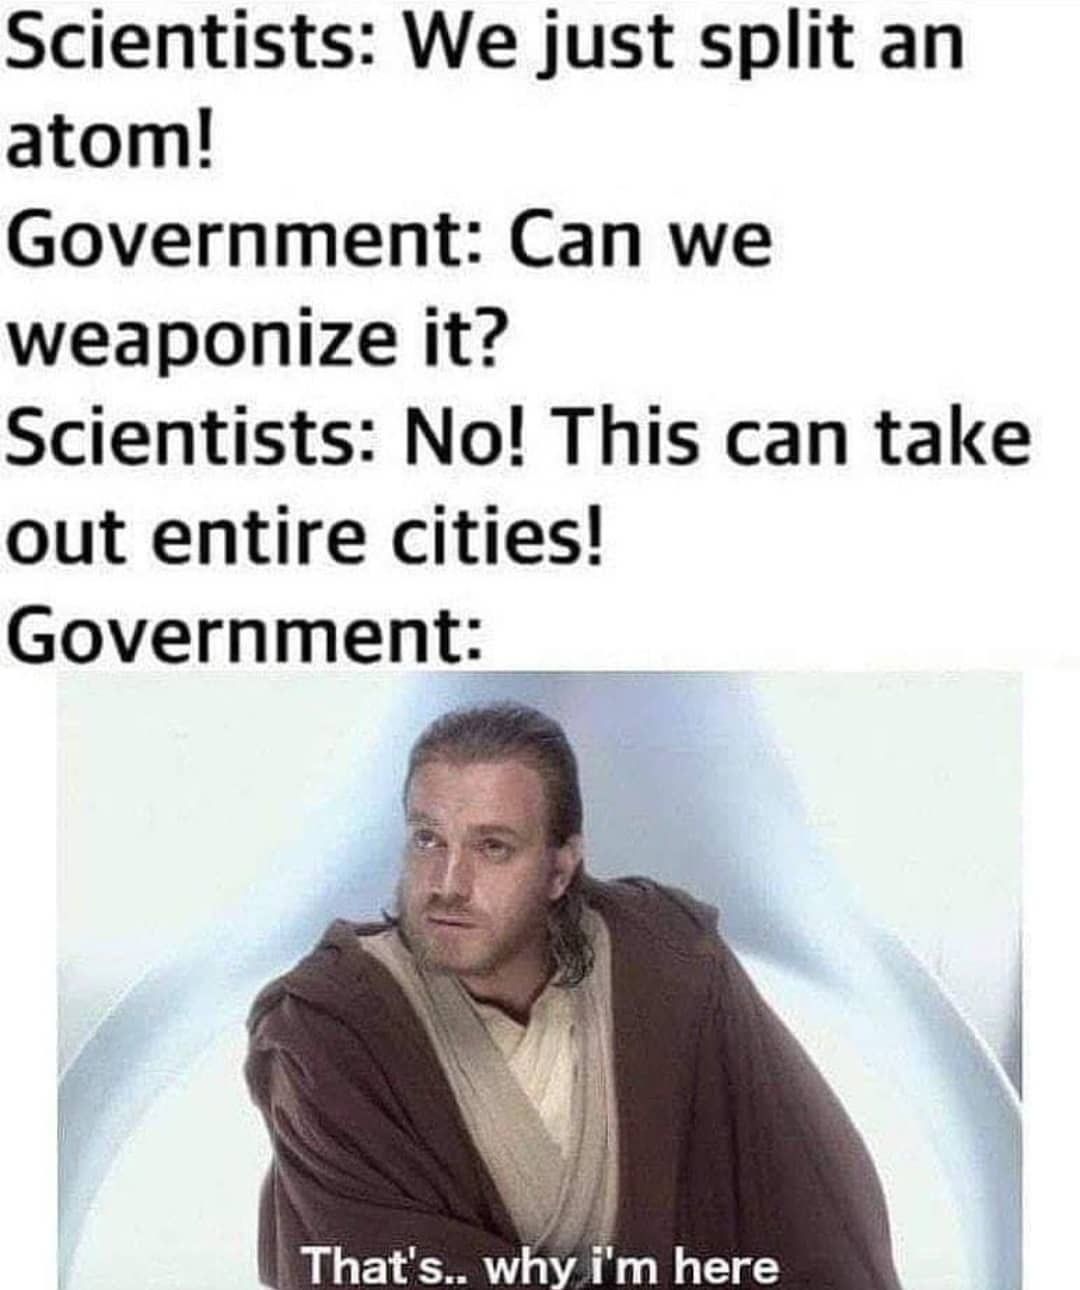 Scientists: We just split an atom! Government: Can we weaponize it? Scientists: No! This can take out entire cities! Government: That's... why I'm here.